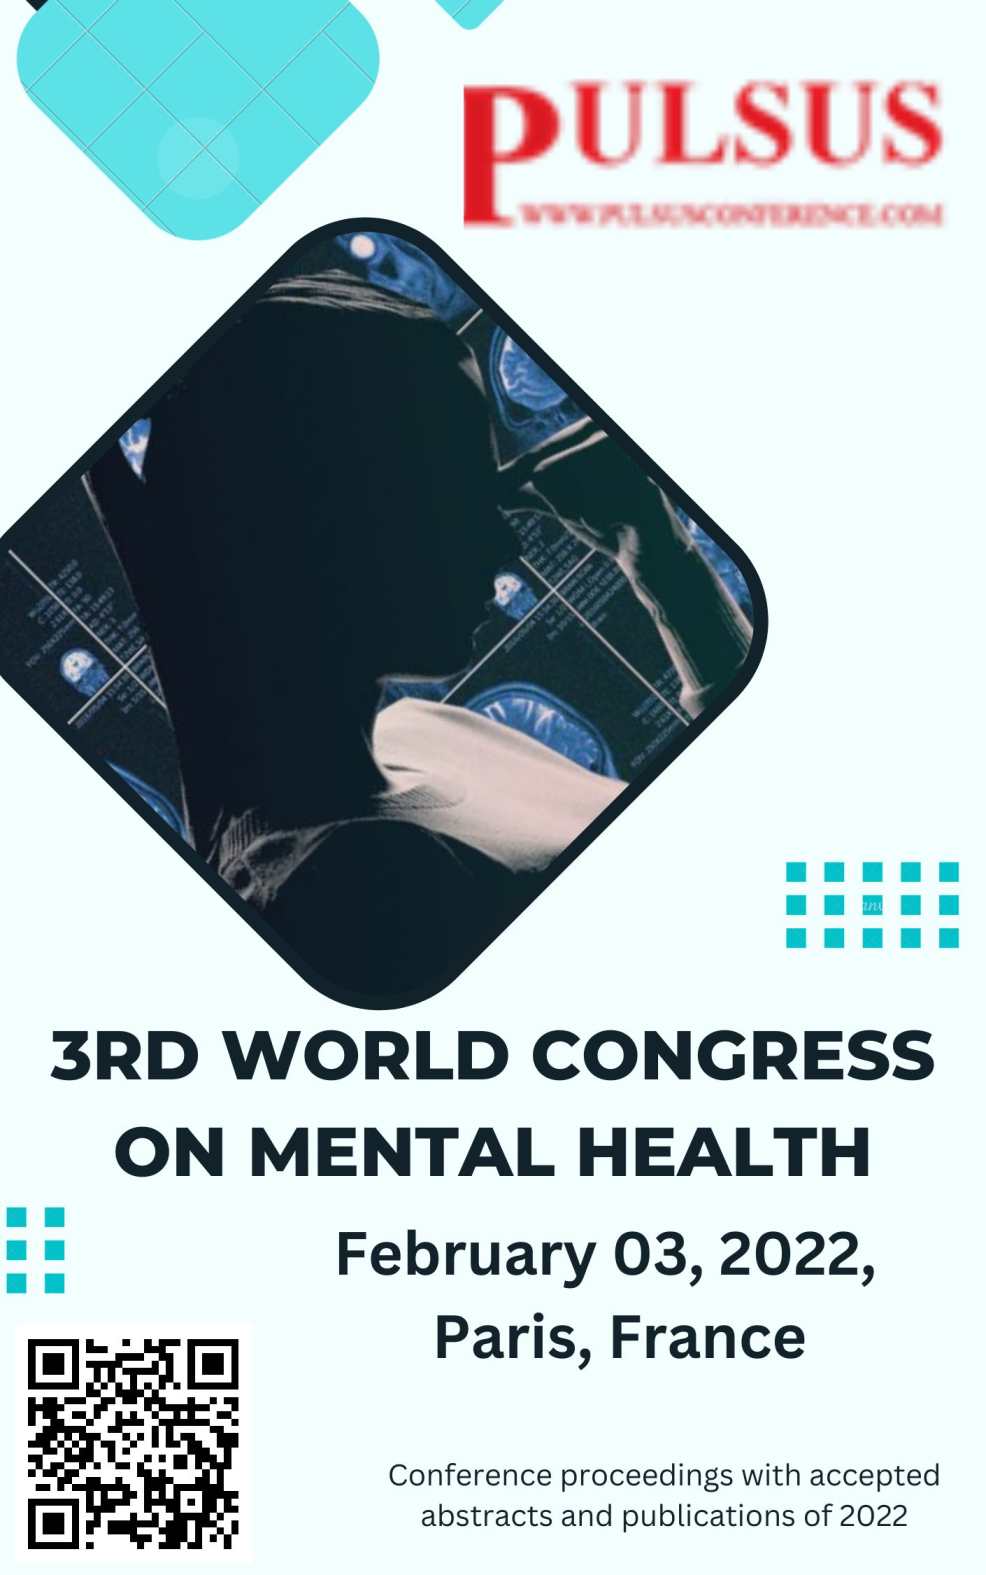 https://www.pulsus.com/conference-abstracts/mental-health-brain-disorders-2022-proceedings.html	